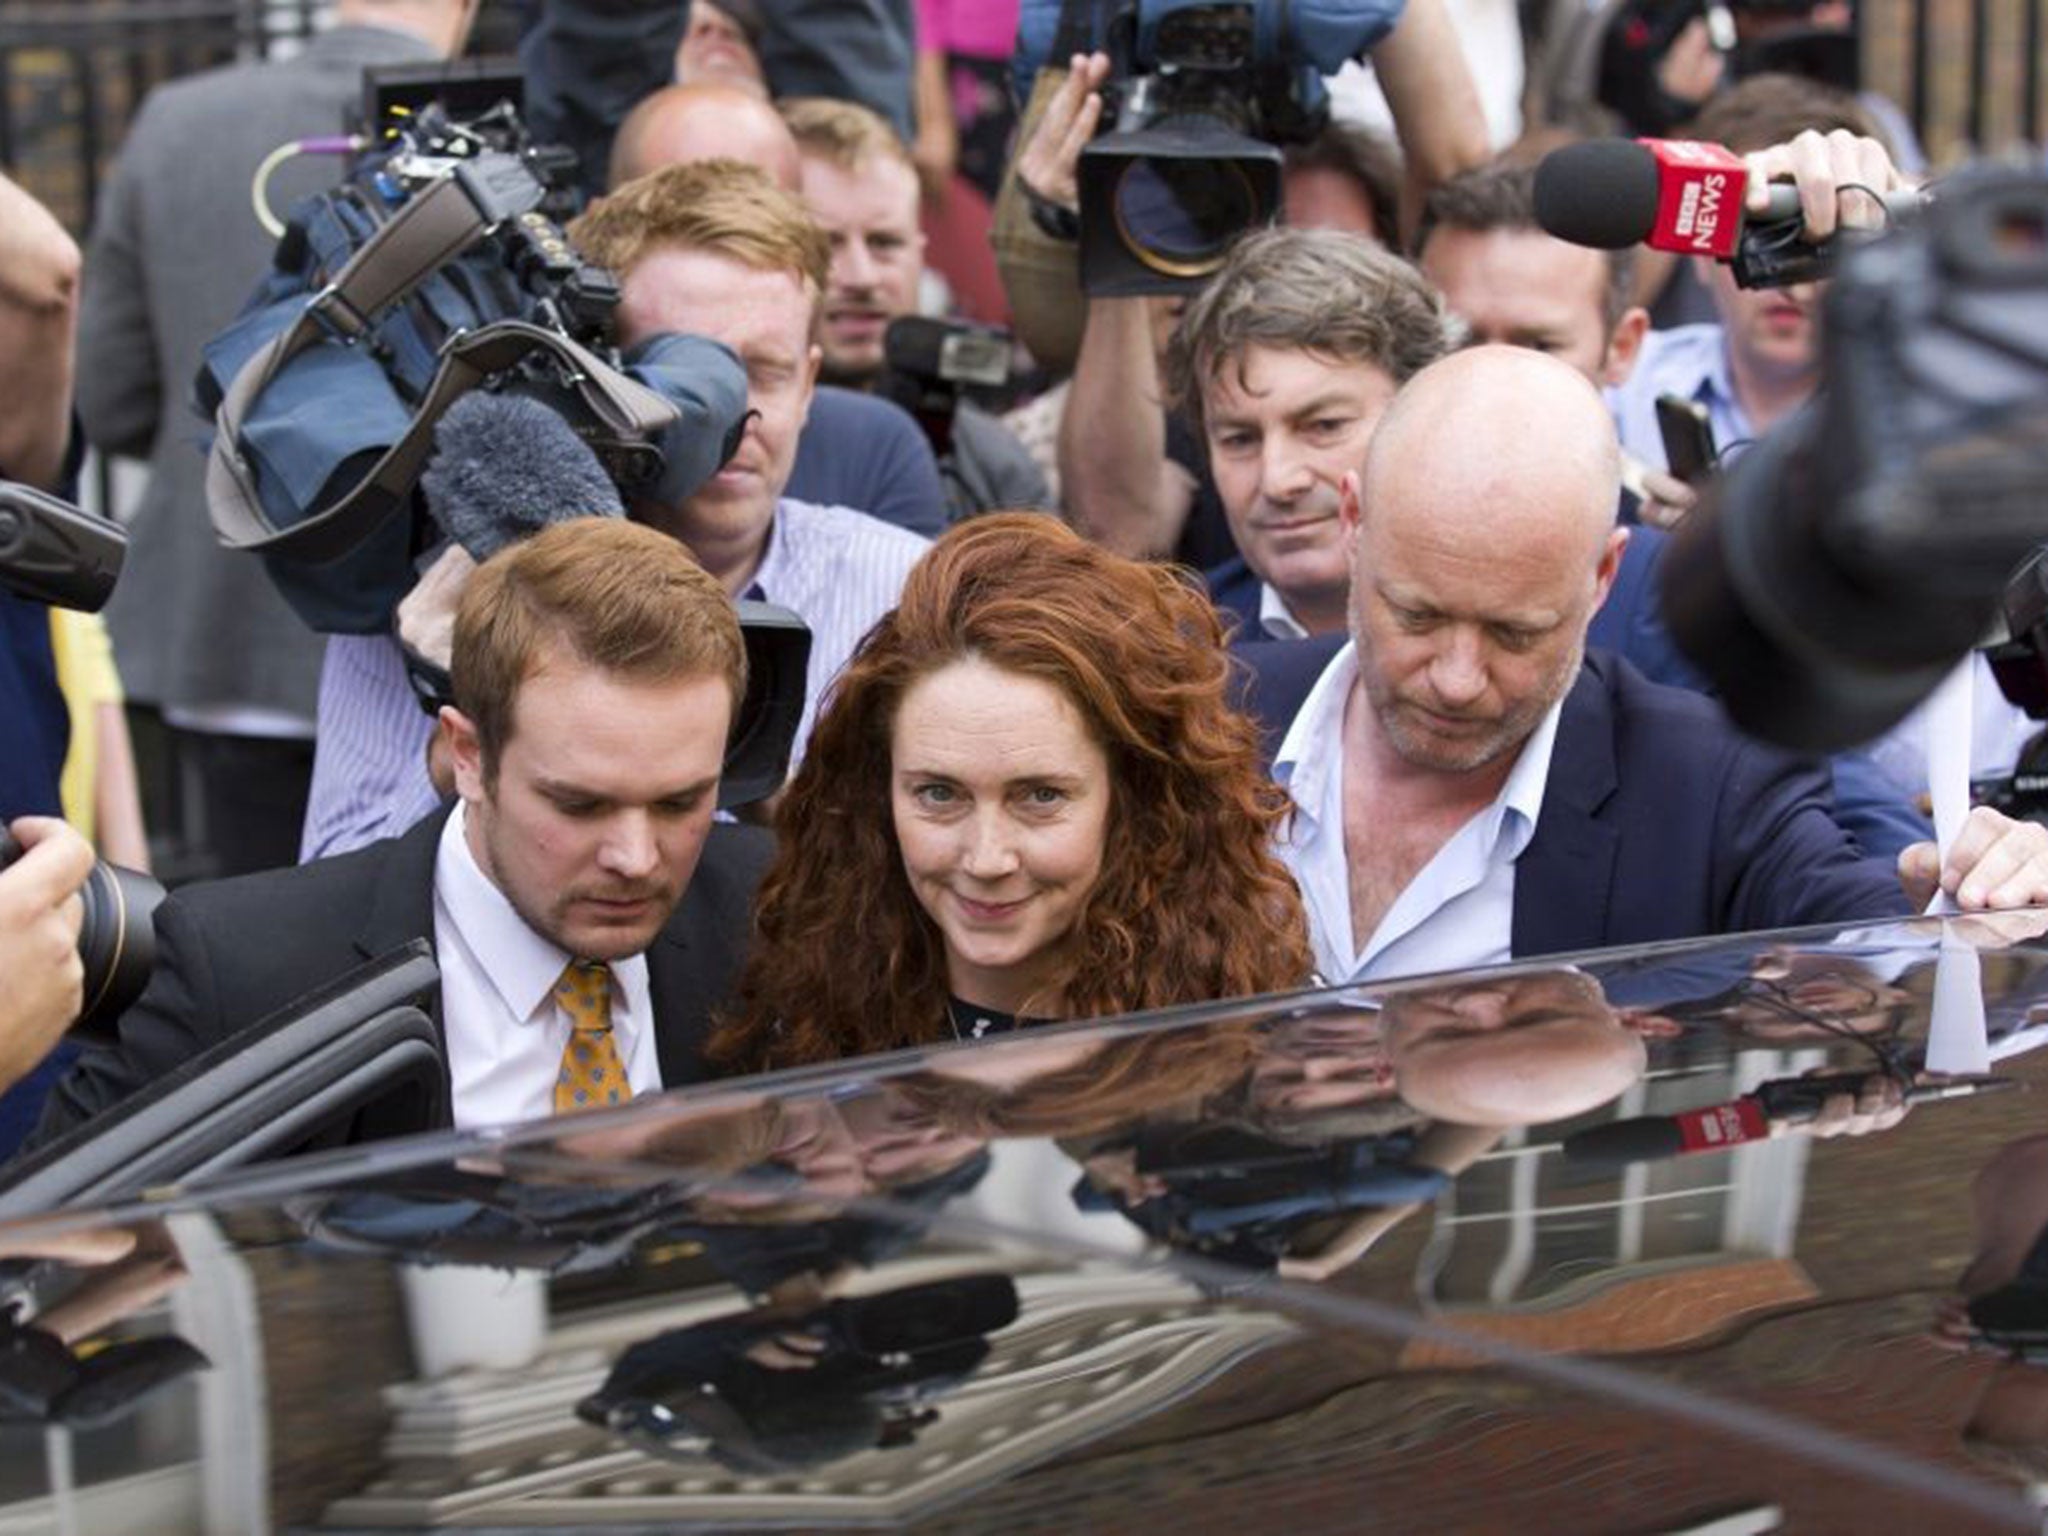 Former News International chief executive Rebekah Brooks is escorted through a crowd of journalists in London with her husband Charlie behind her as she leaves Southwark Crown Court having been found not guilty on all charges